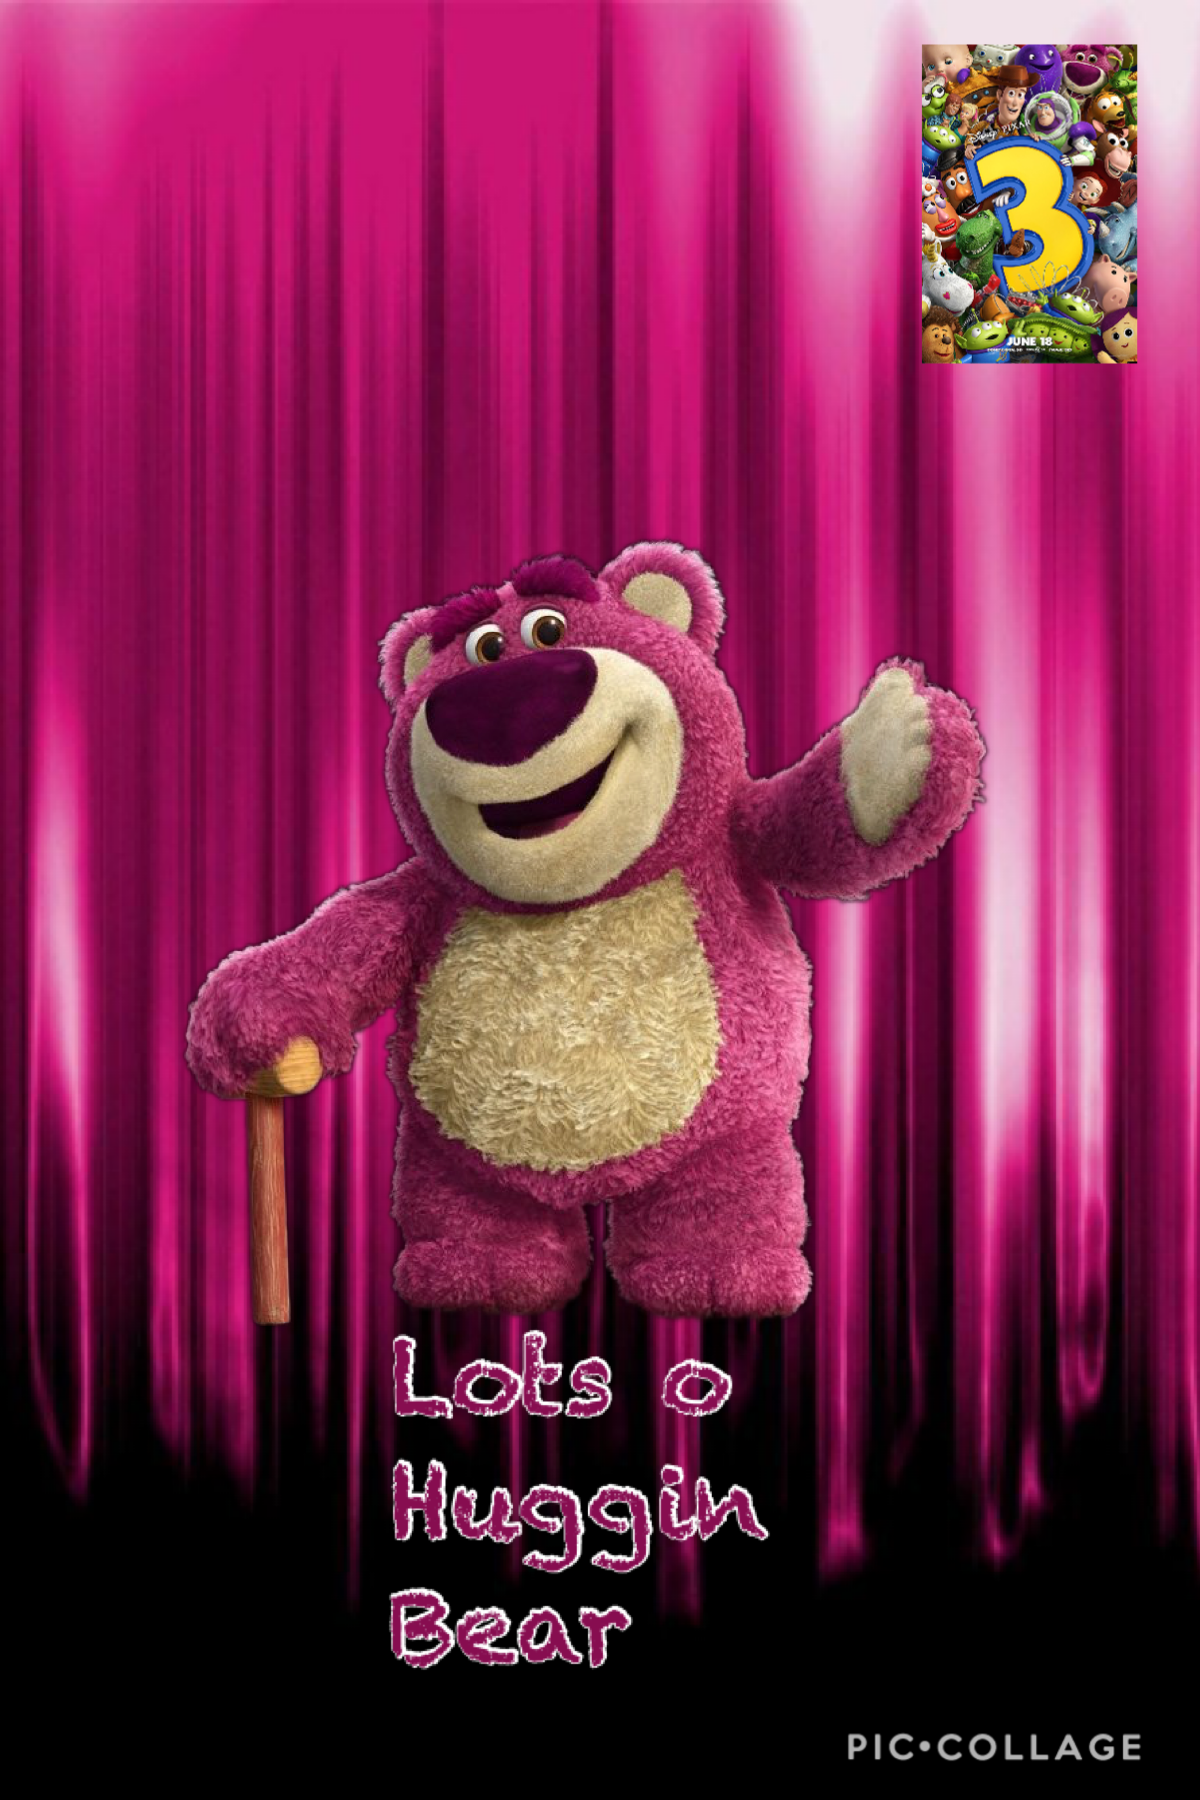 Today’s Disney character of the day is lots o hugging bear 